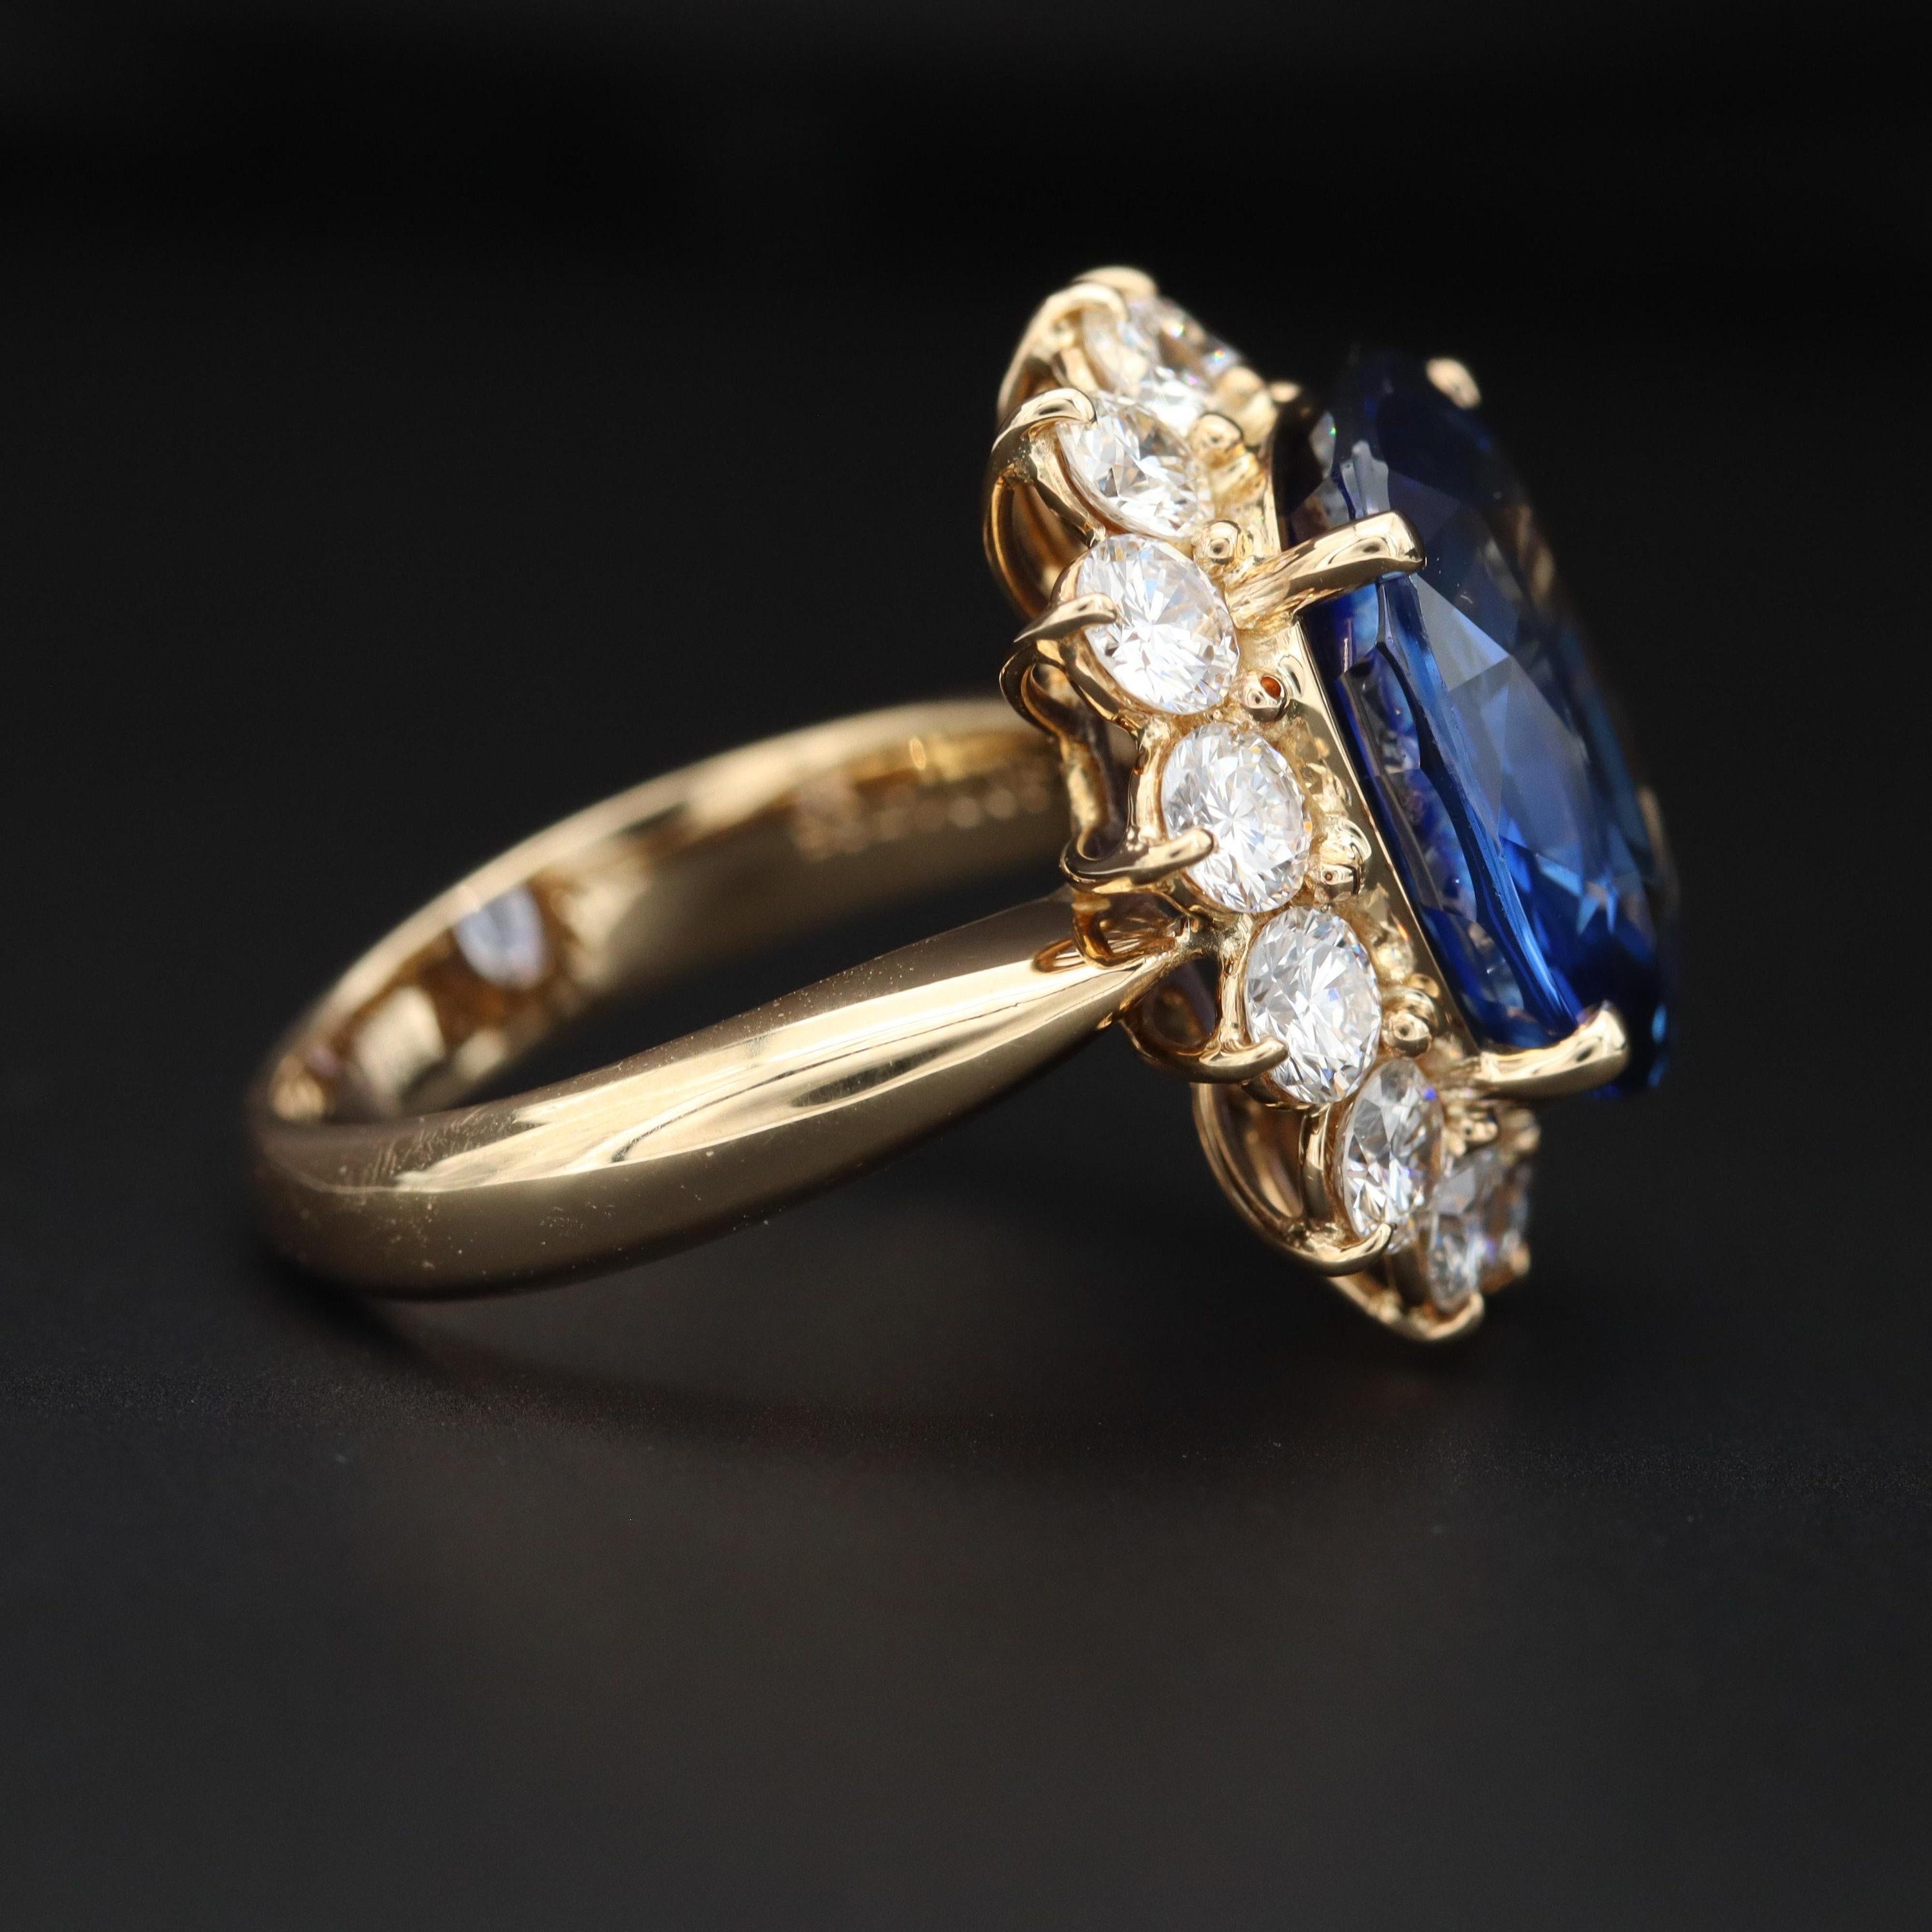 For Sale:  18K Gold 5 CT Natural Sapphire Diamond Antique Art Deco Style Engagement Ring 4